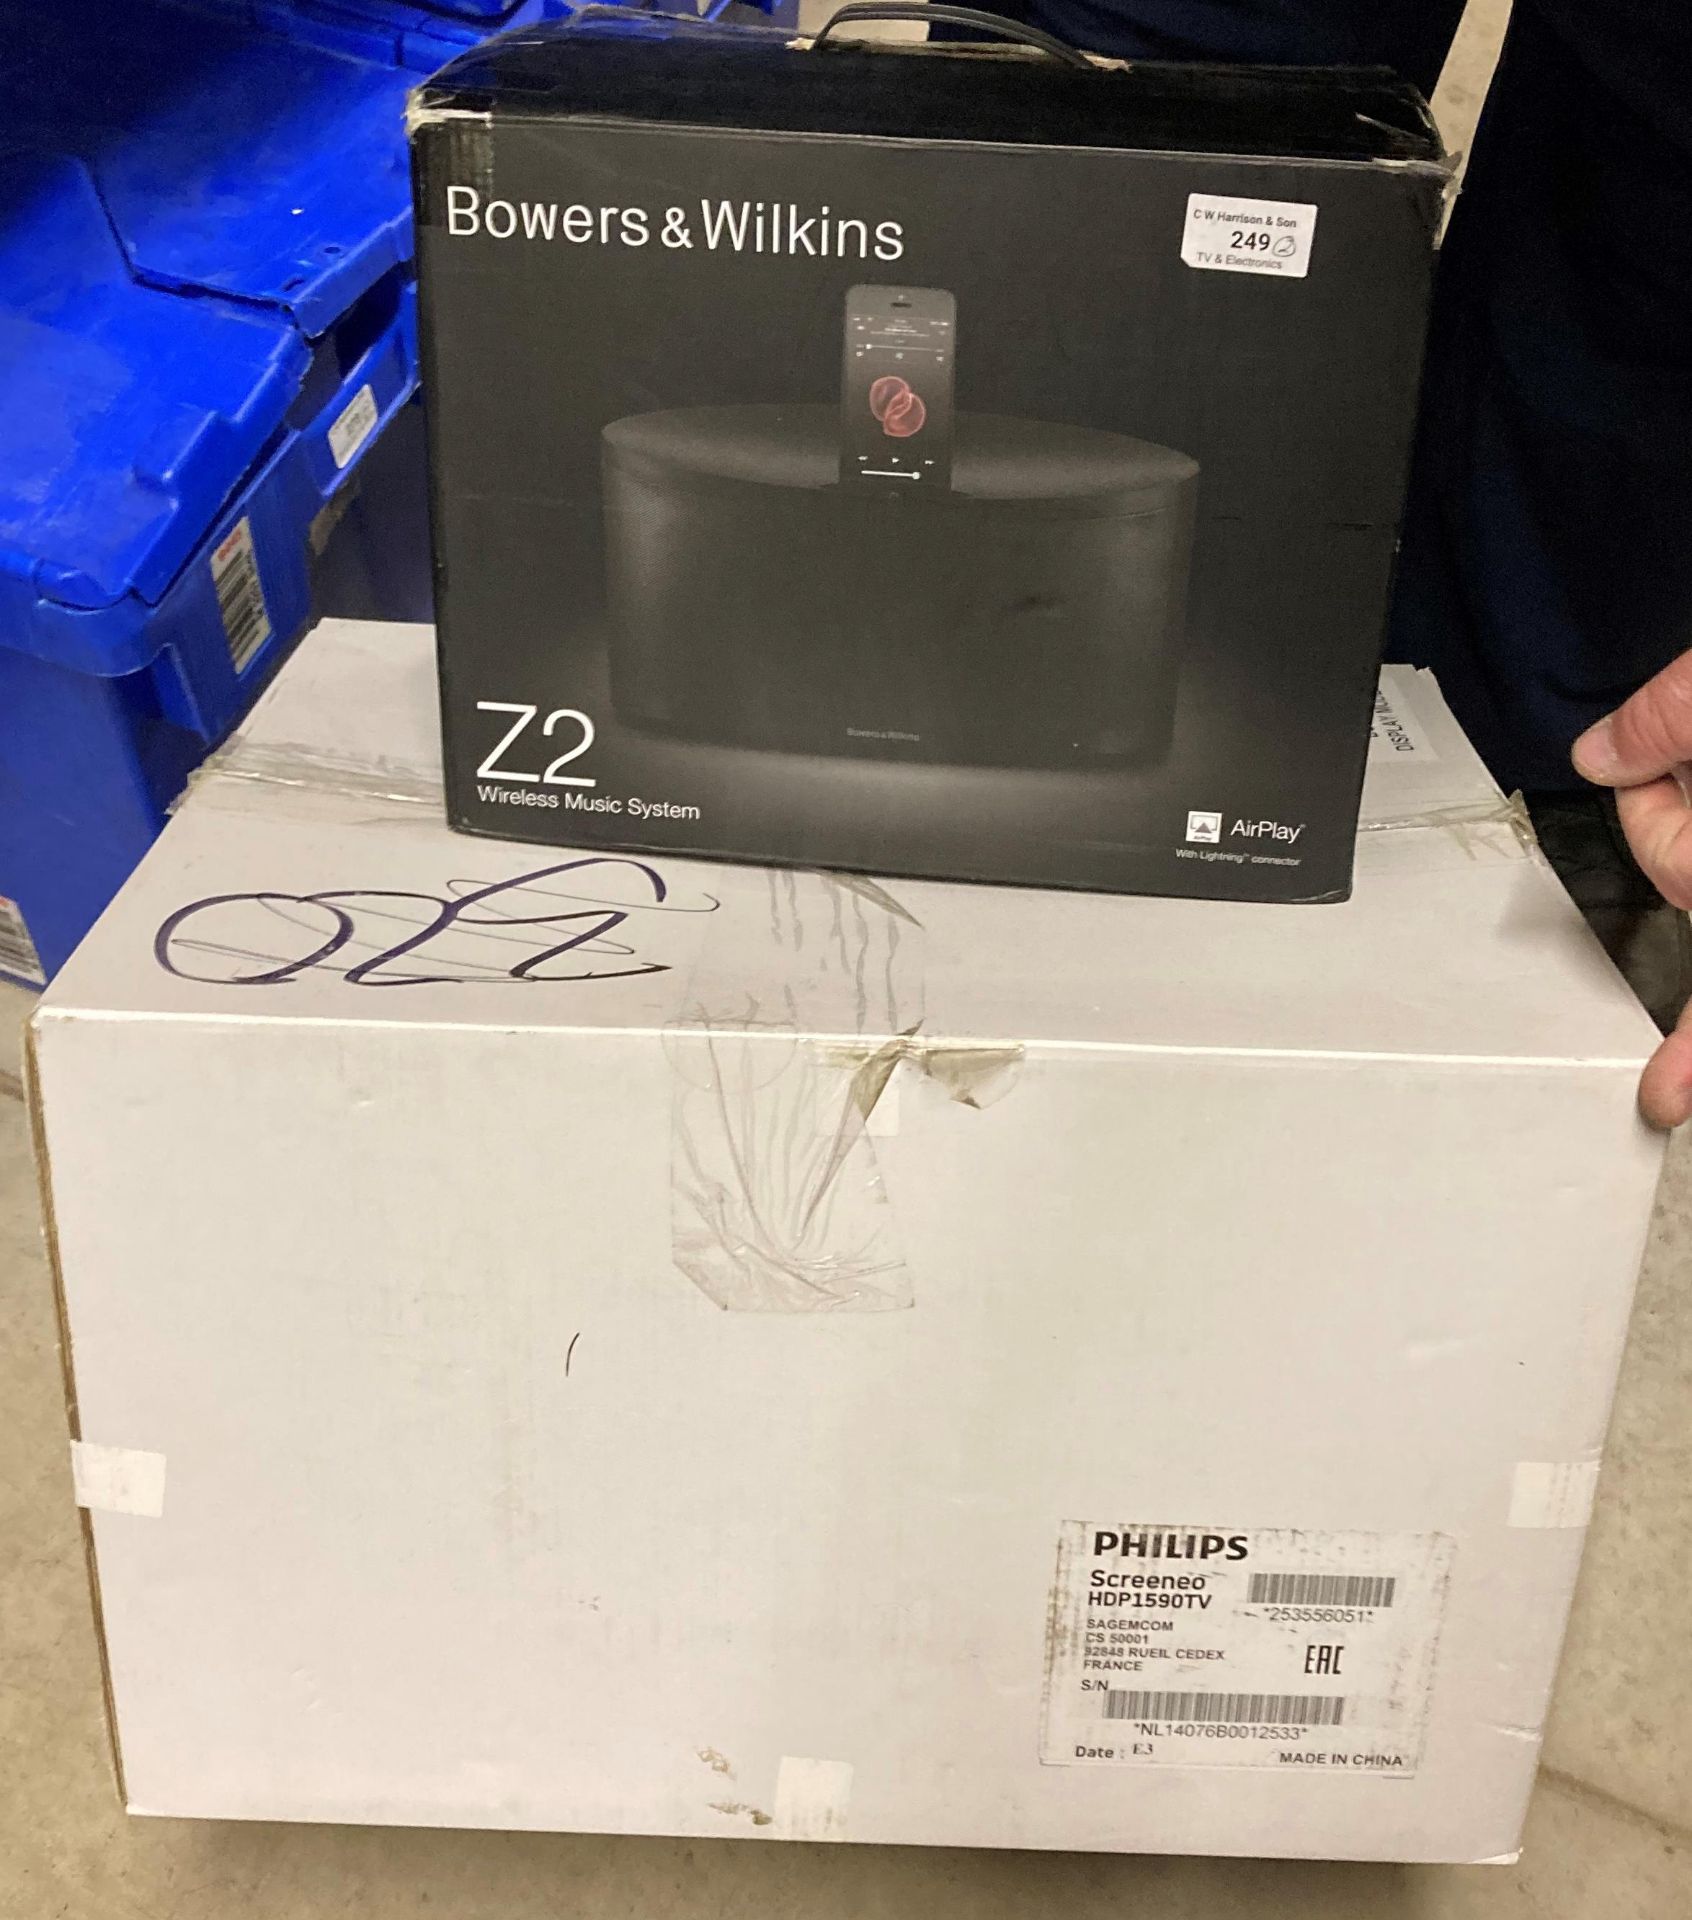 Bowers & Wilkins Z2 wireless music system complete with remote and power lead and a Philips